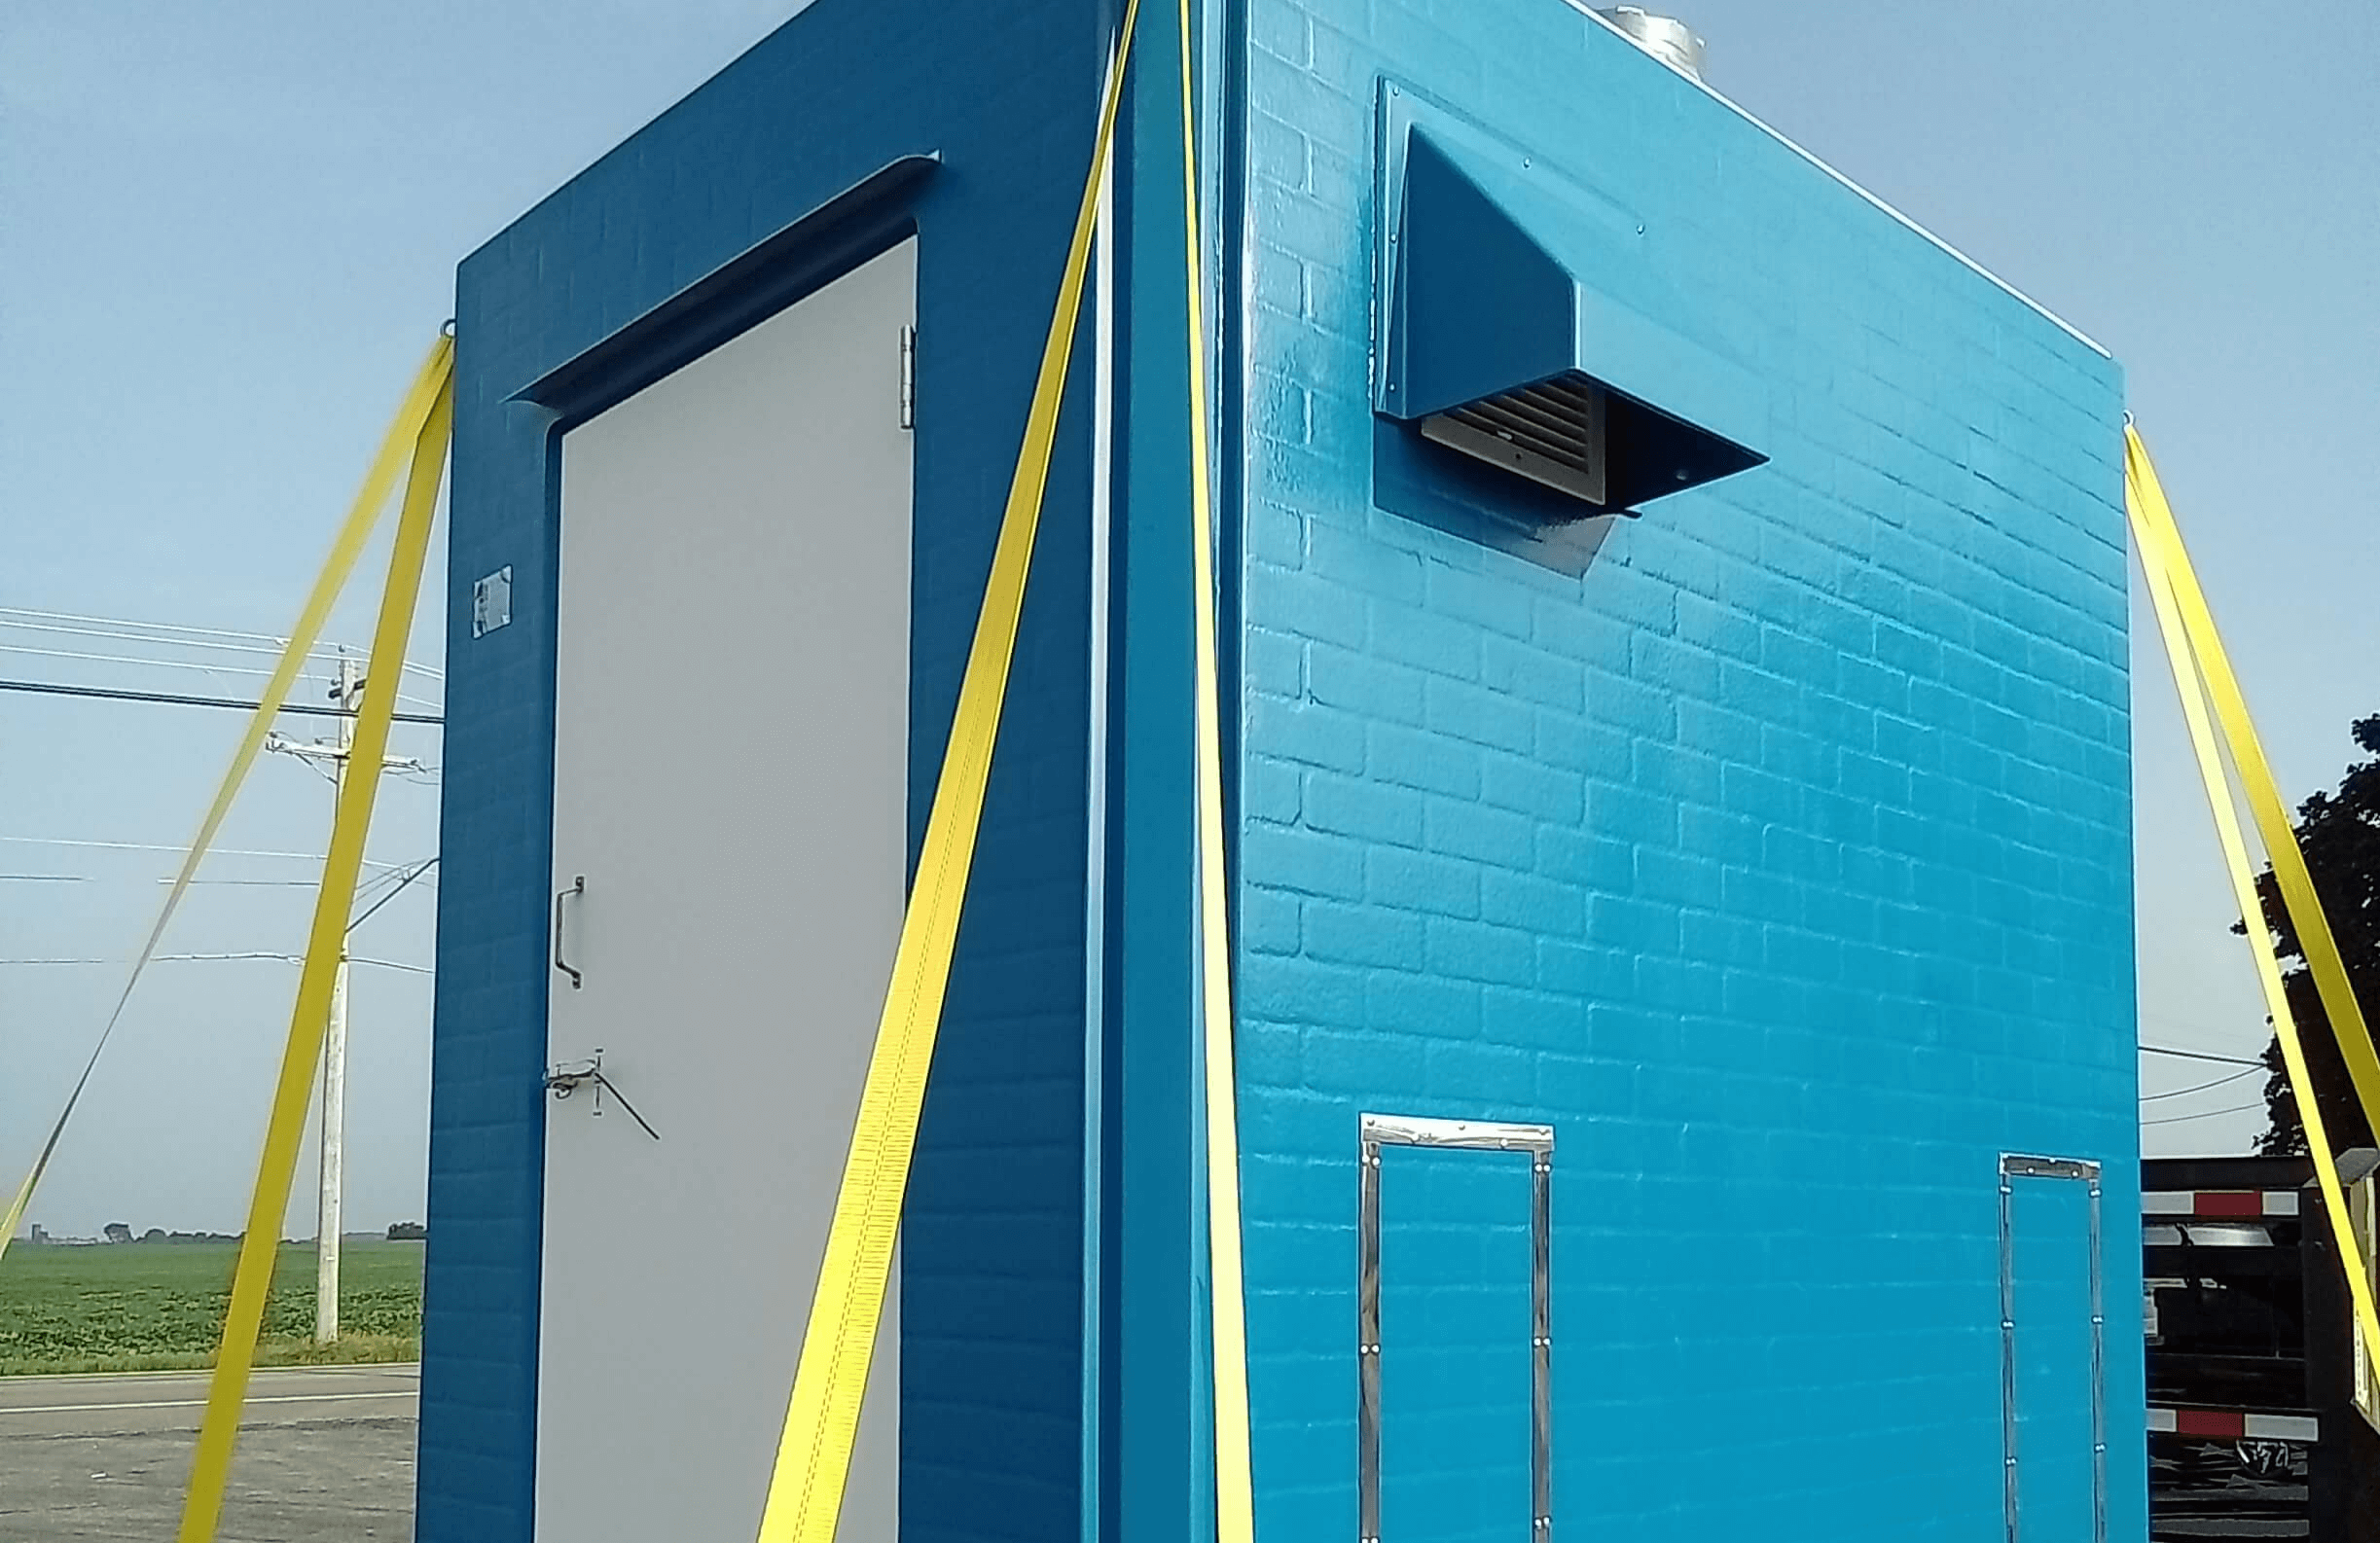 Protecting Landfill RNG Metering Skid With Shelter Works Fiberglass Enclosure